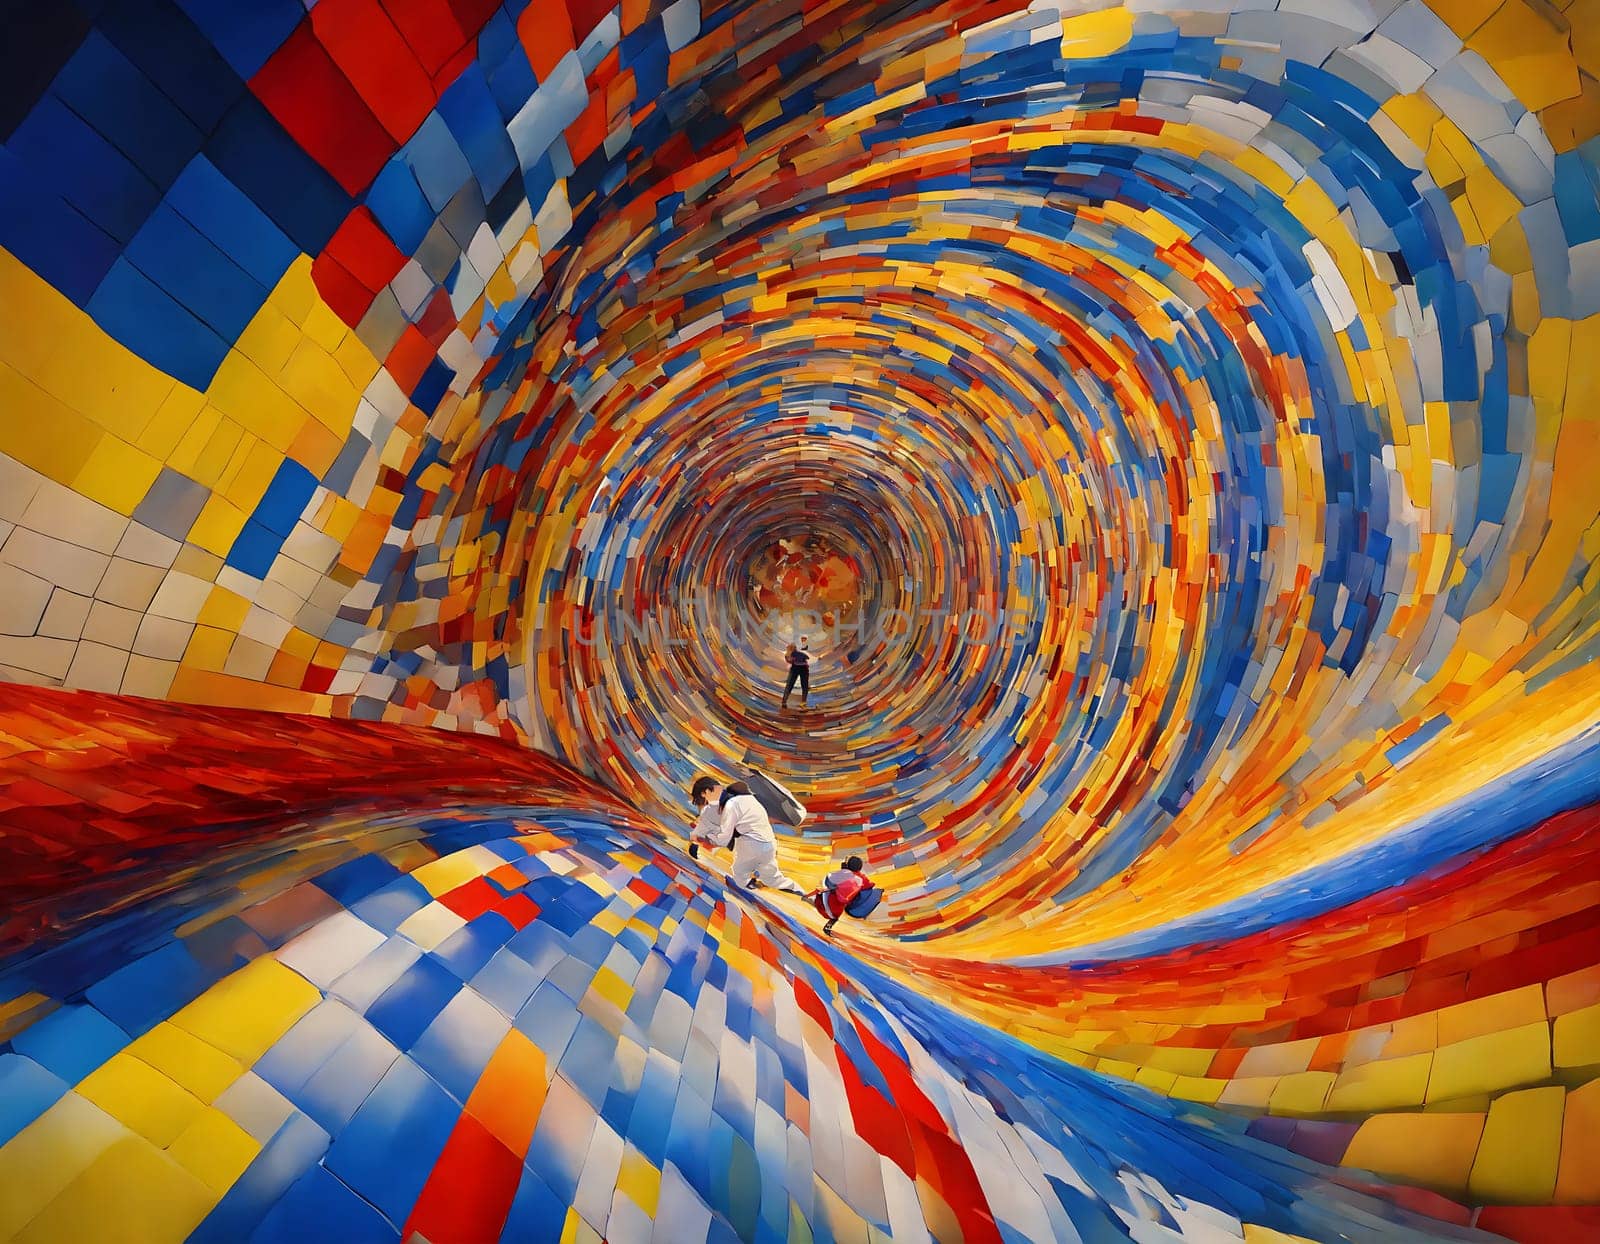 A dynamic and captivating painting featuring a person surrounded by a vivid array of colors inside a tunnel.